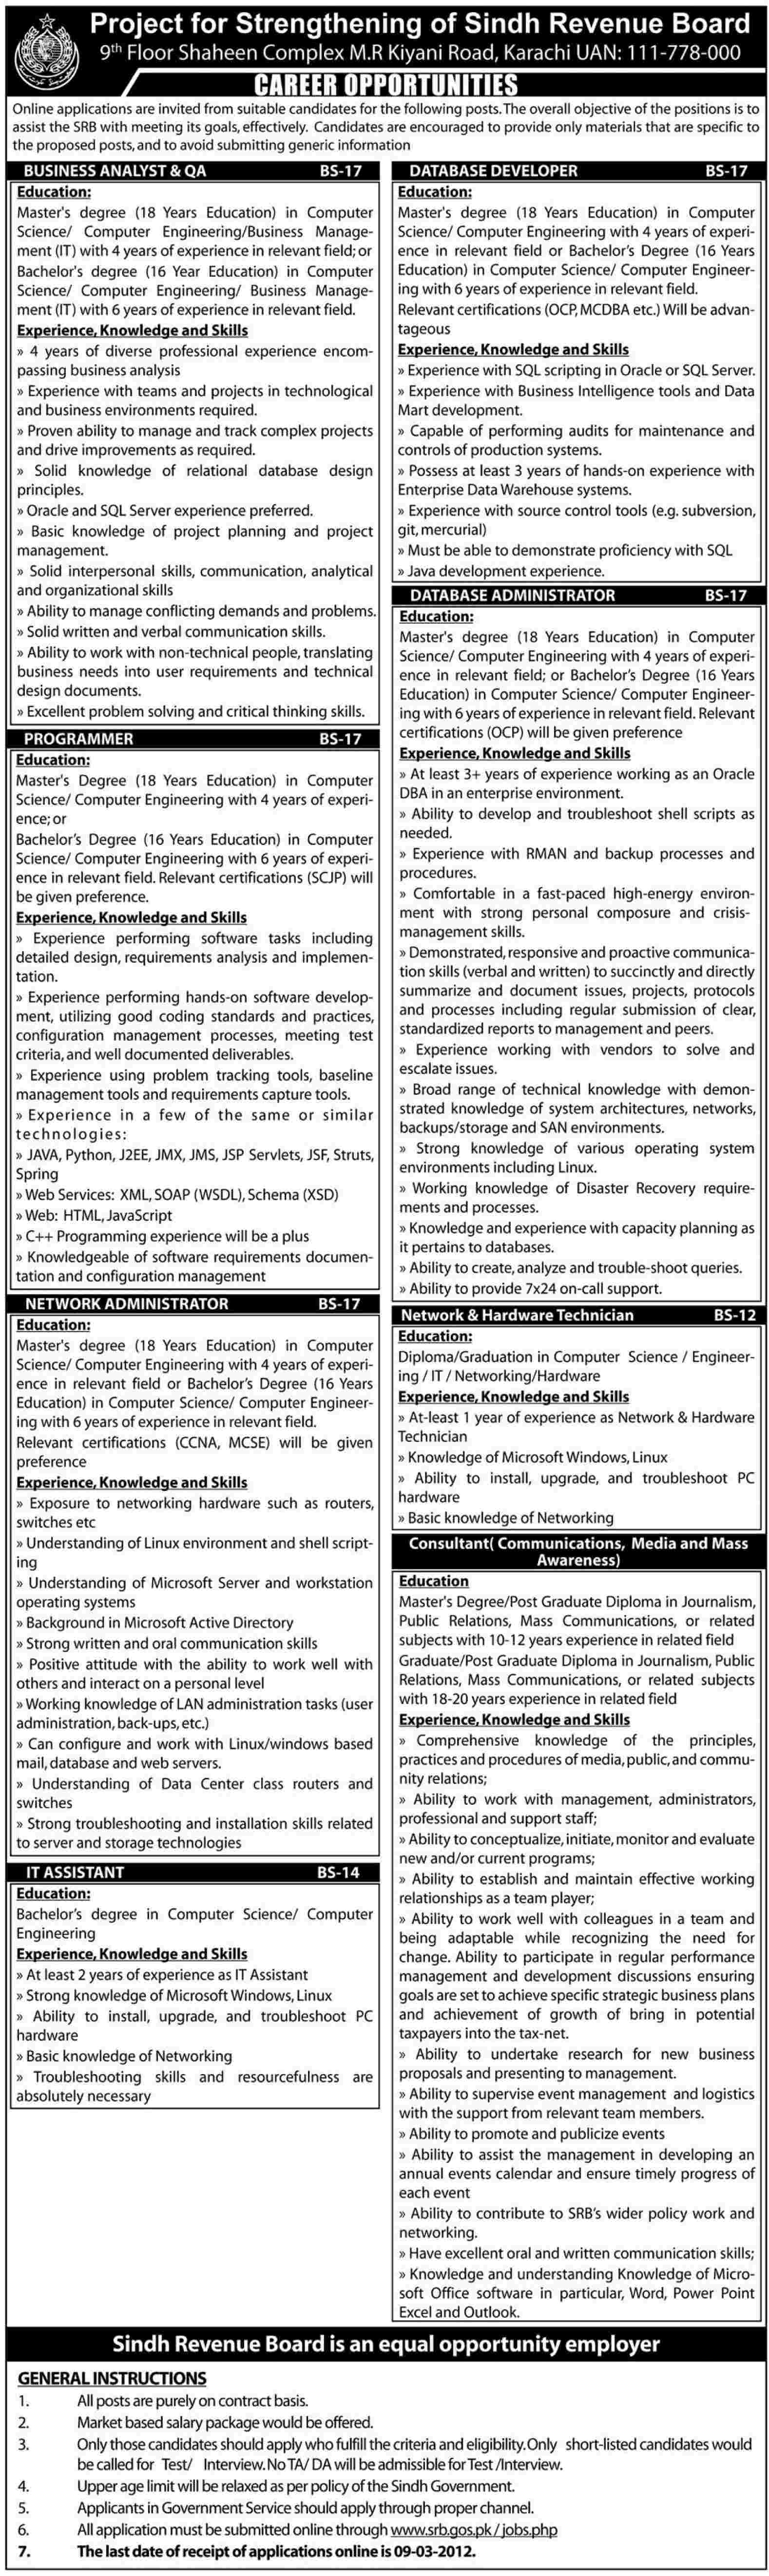 Project for Strengthening of Sindh Revenue Board Jobs Opportunity